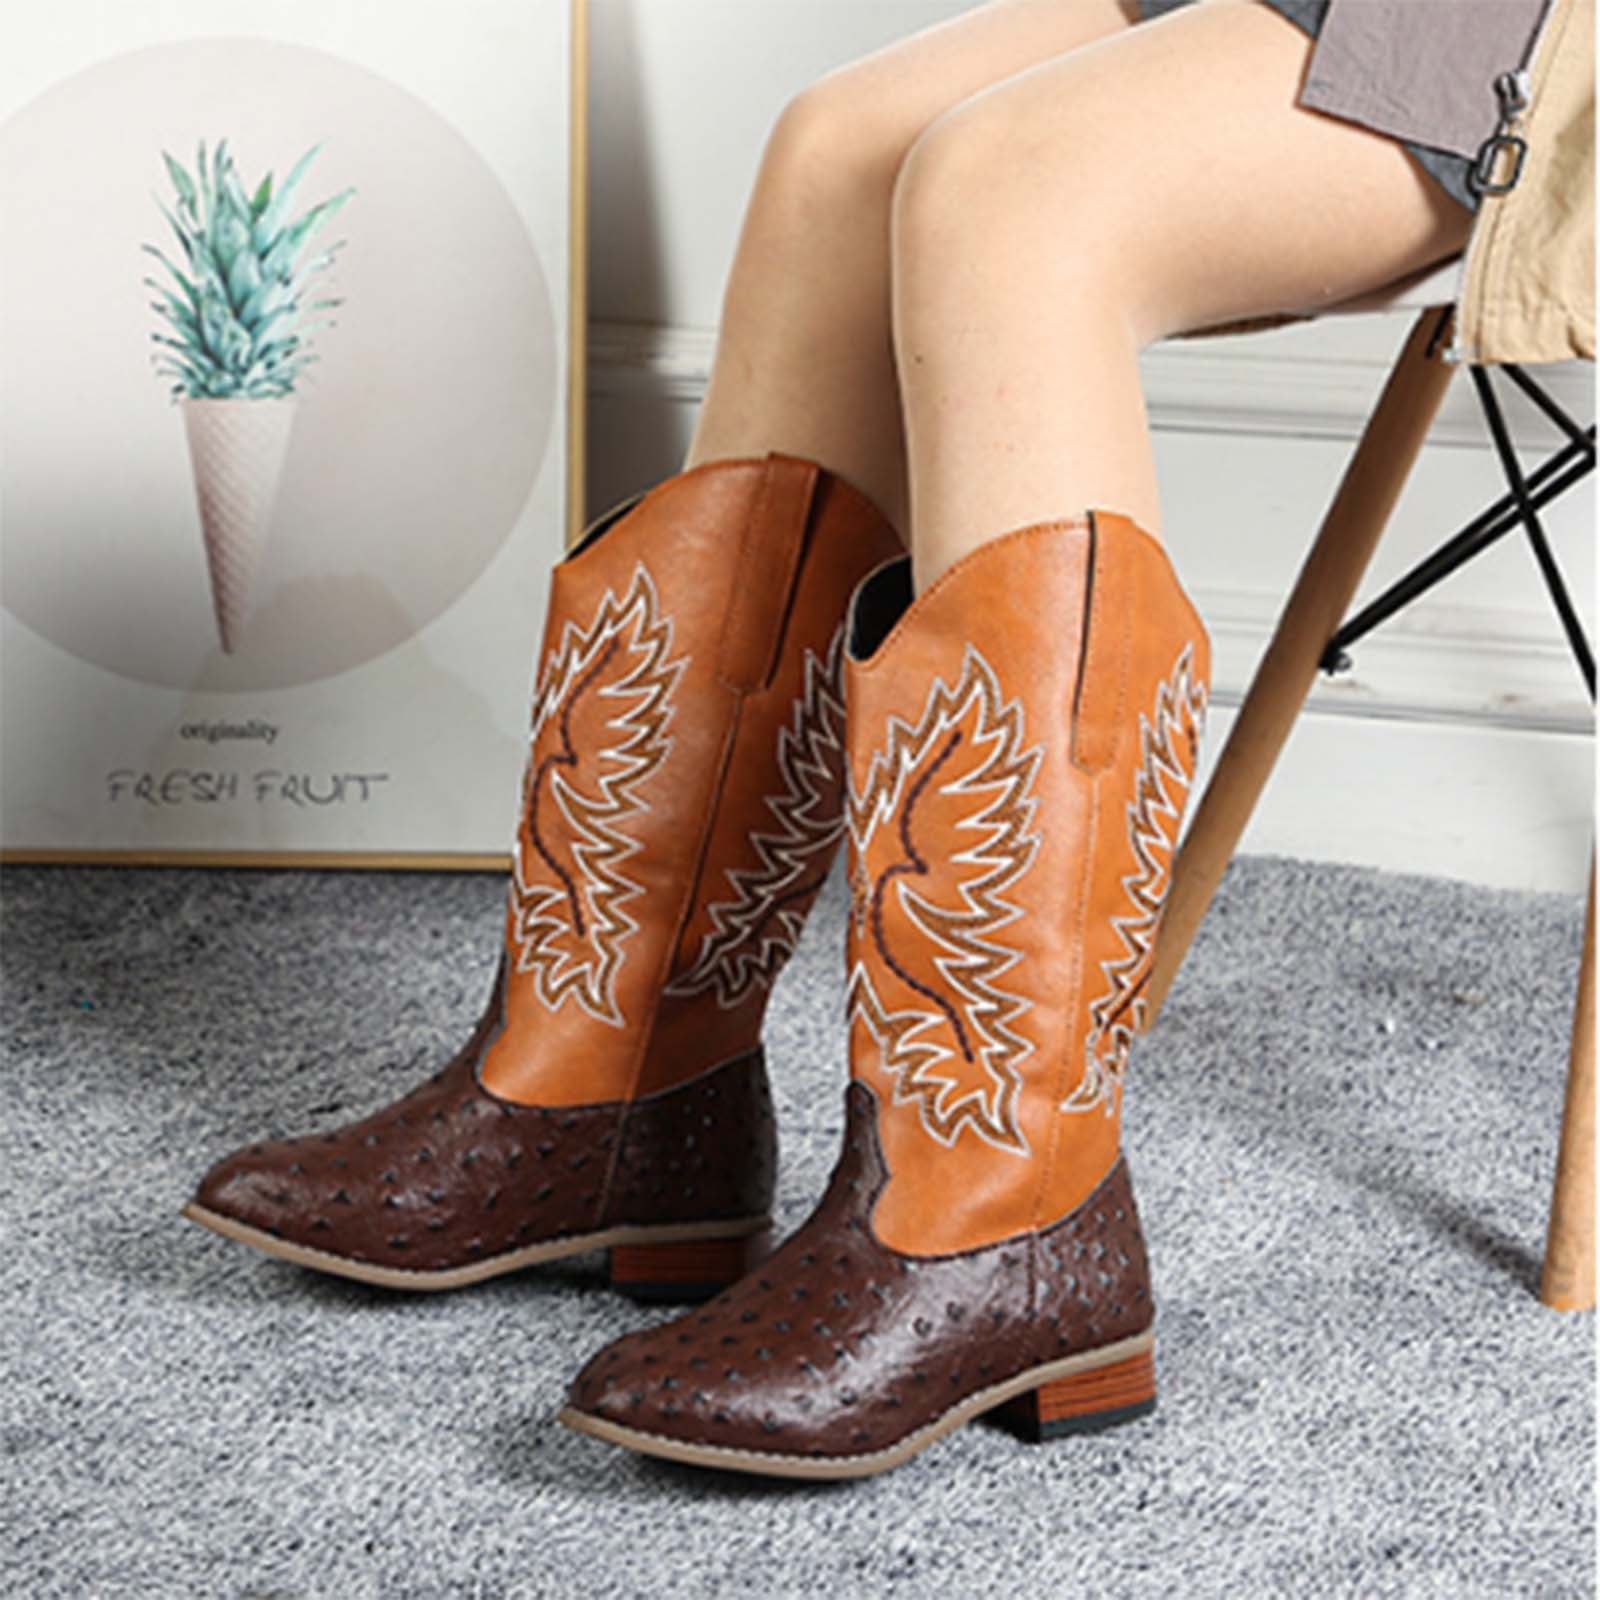 Ladies Womens Middle Block Heel Round Toe Western Cowboy Ankle Boots Shoes Size 